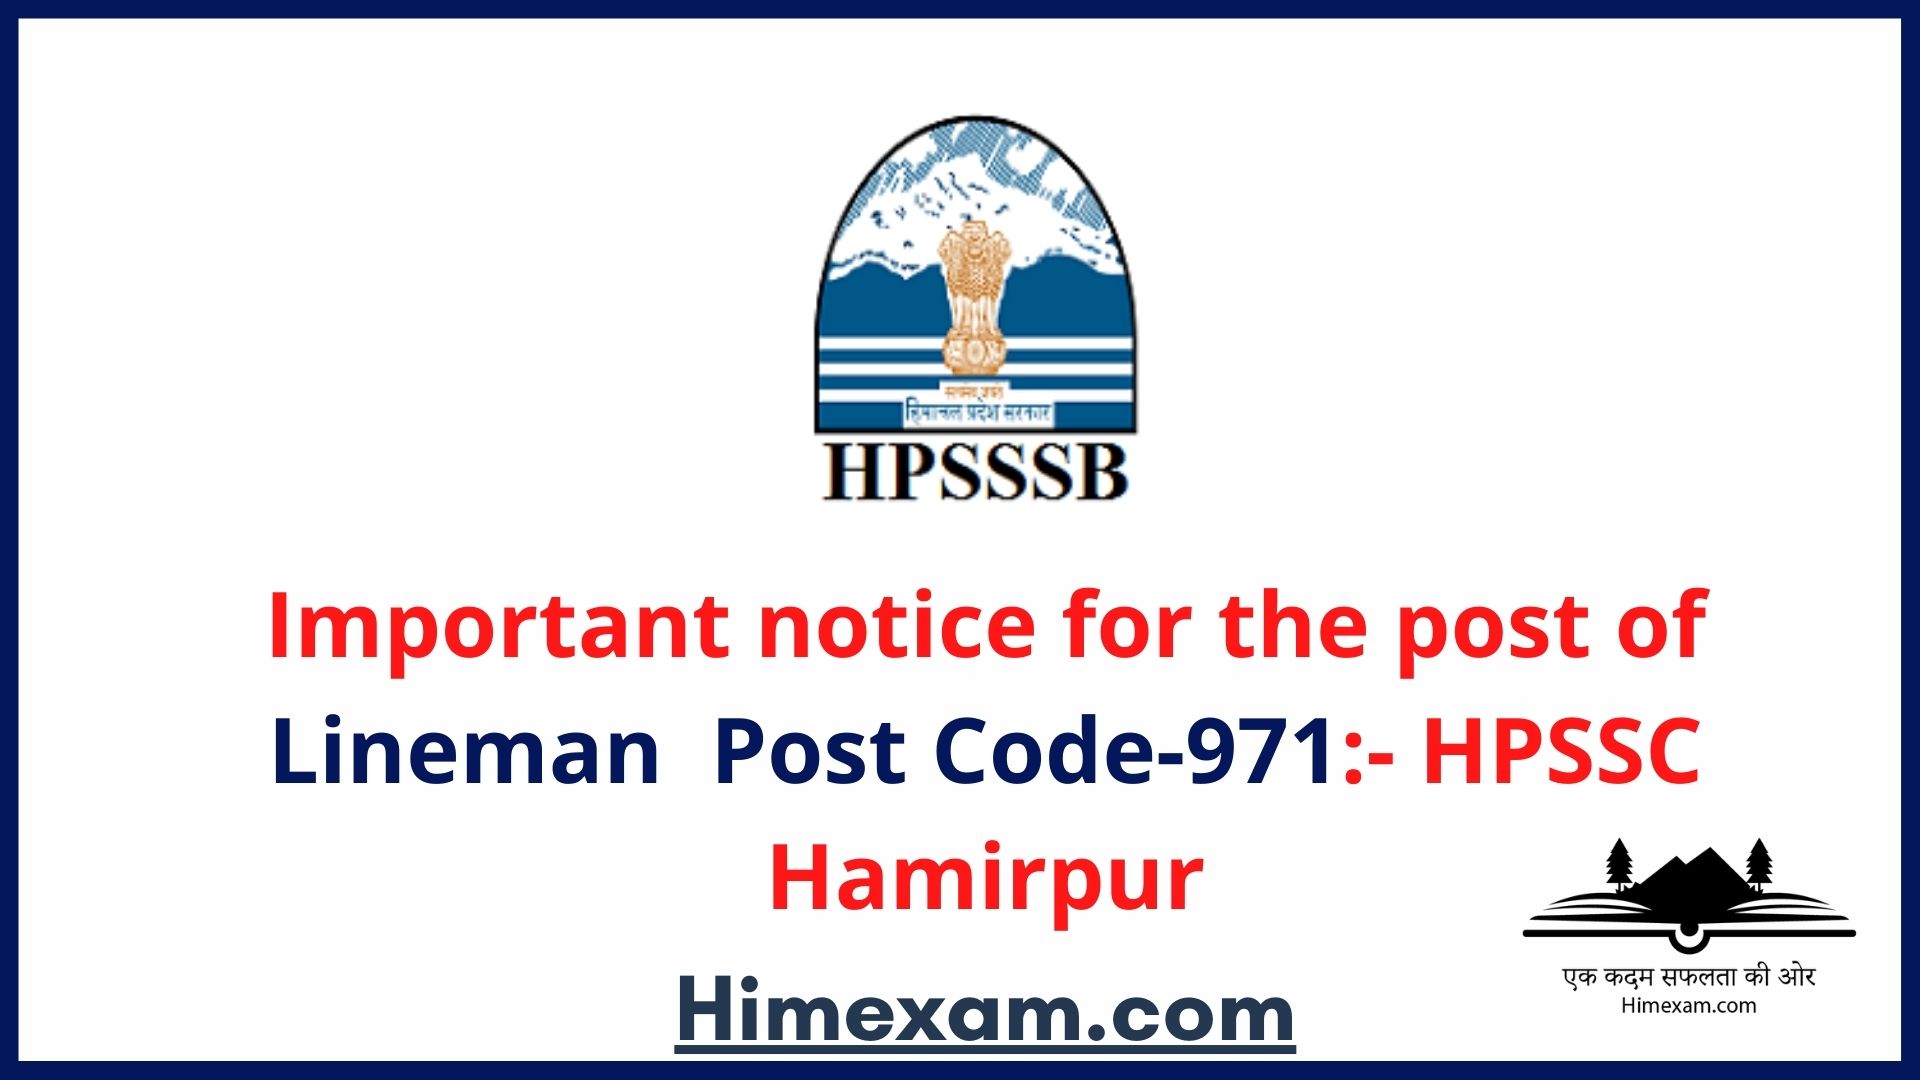 Important notice for the post of Lineman  Post Code-971:- HPSSC Hamirpur